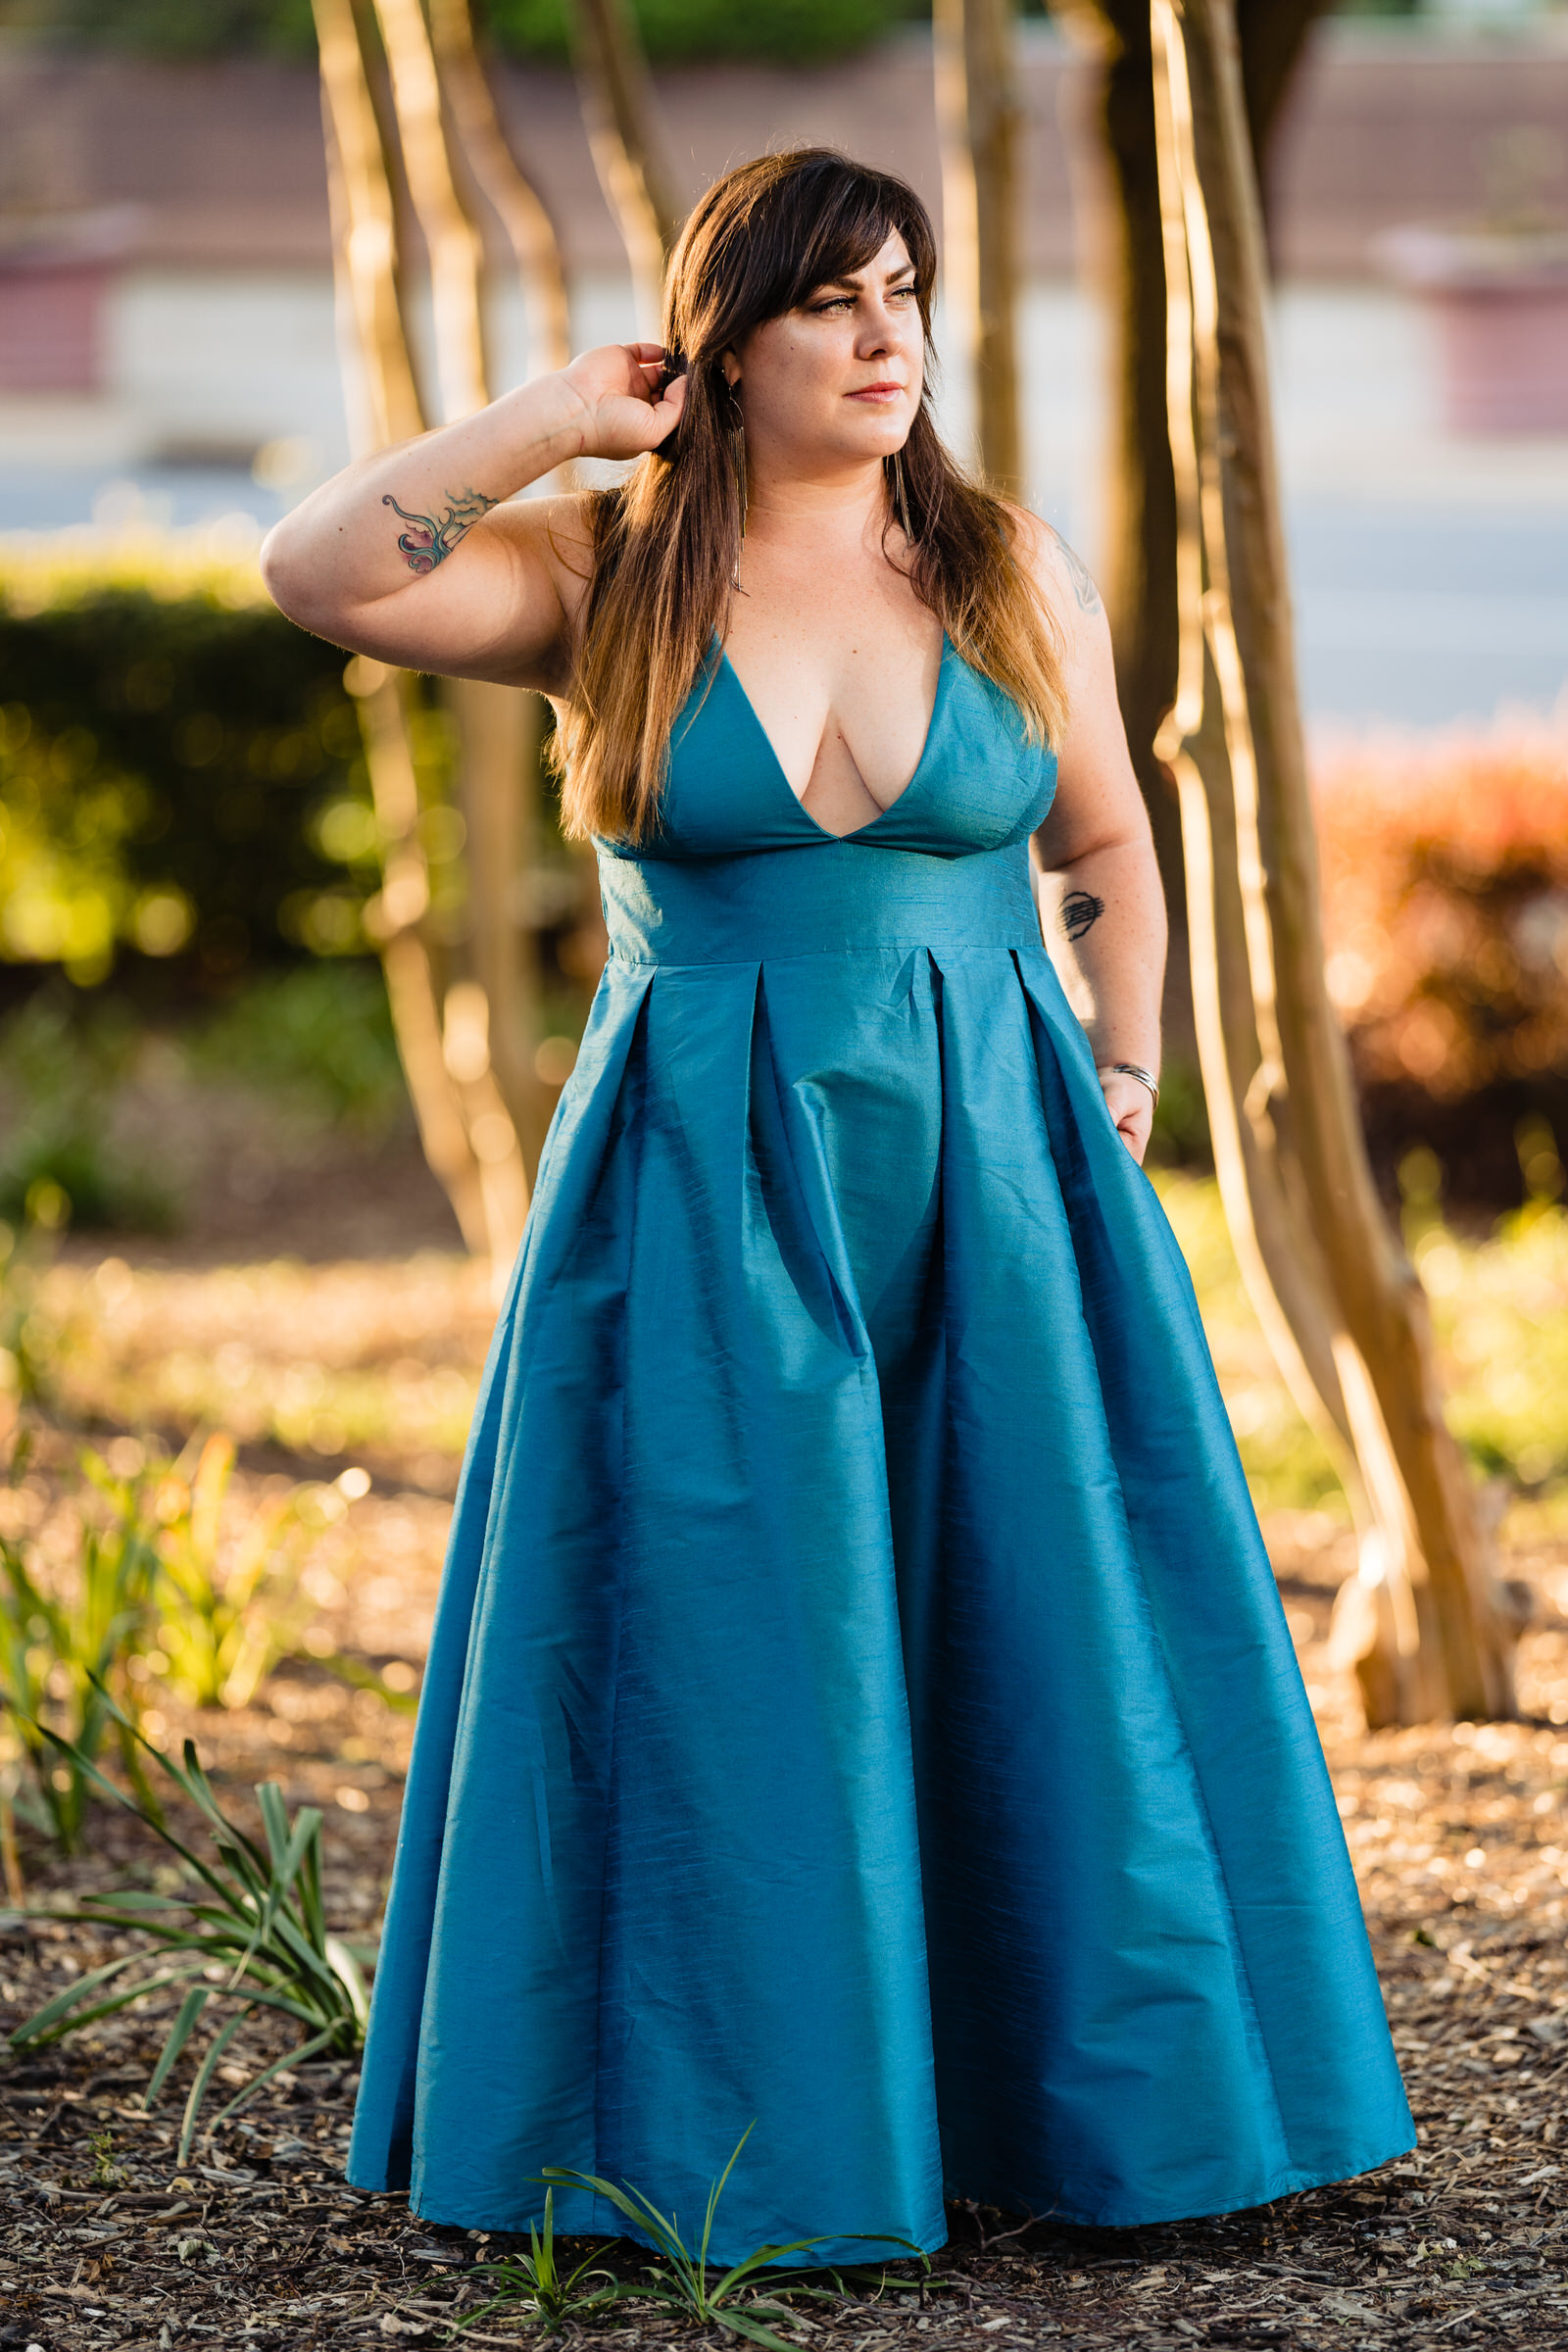 Woman in a teal dress in golden light